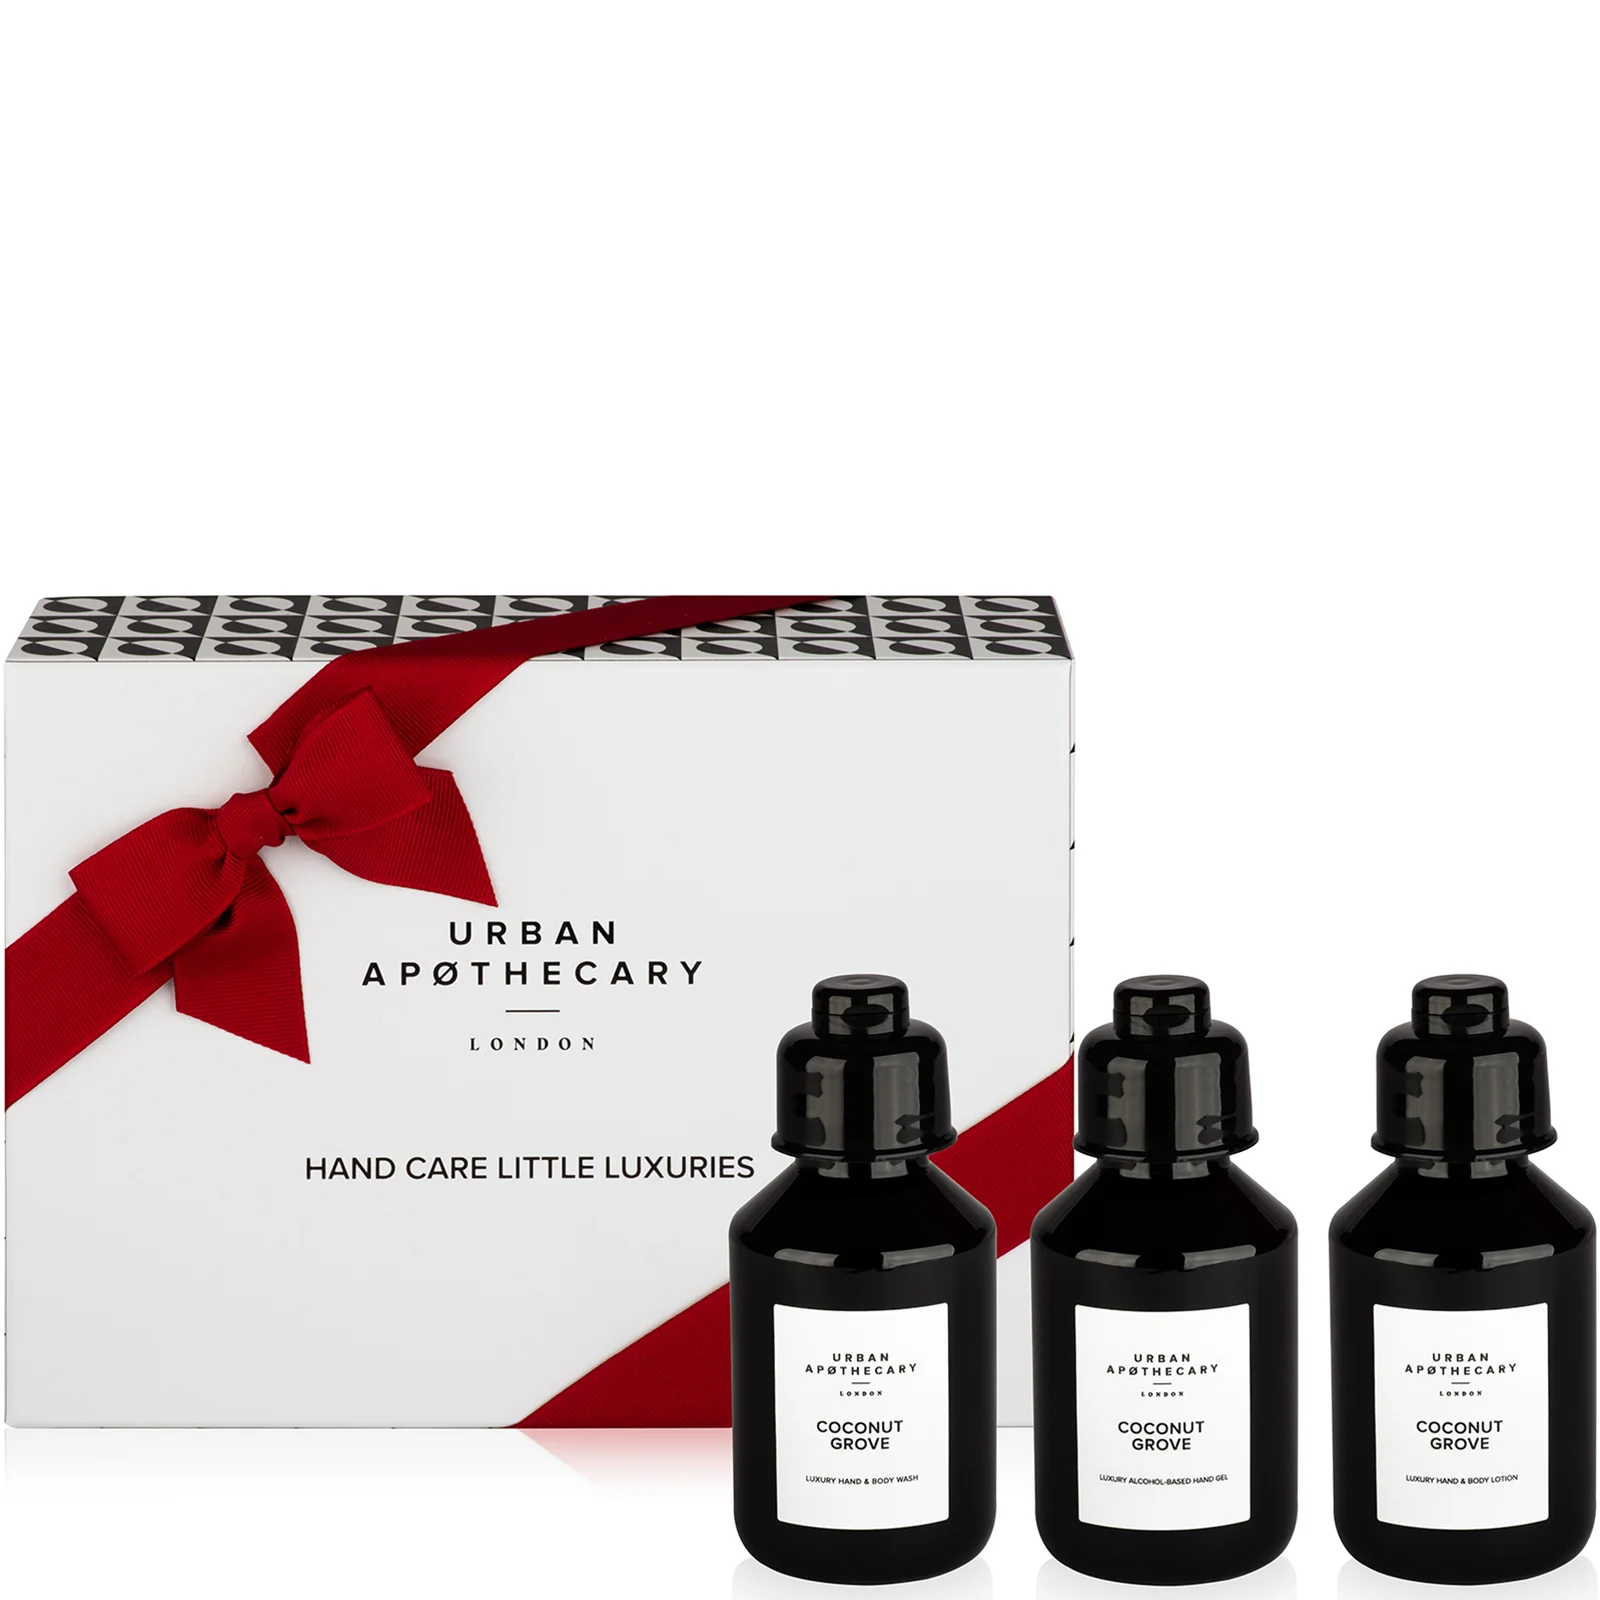 Urban Apothecary Coconut Grove Hand Care Little Luxuries Gift Set (3 pieces) Image 1